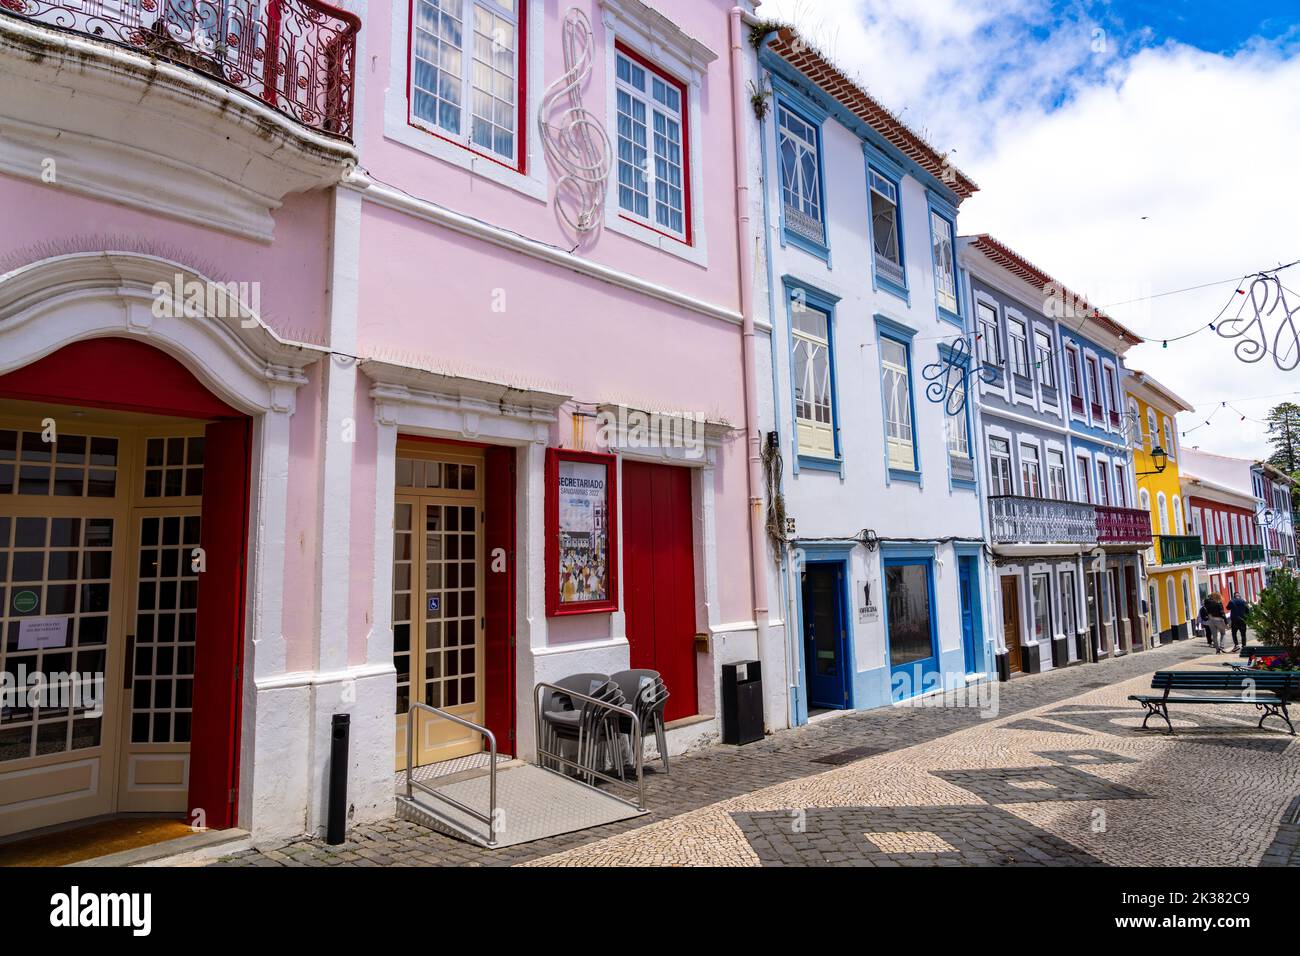 The pink facade of the Teatro Angrense, a performance art theatre built in the 1850’s in Angra do Heroismo, Terceira Island, Azores, Portugal. Stock Photo